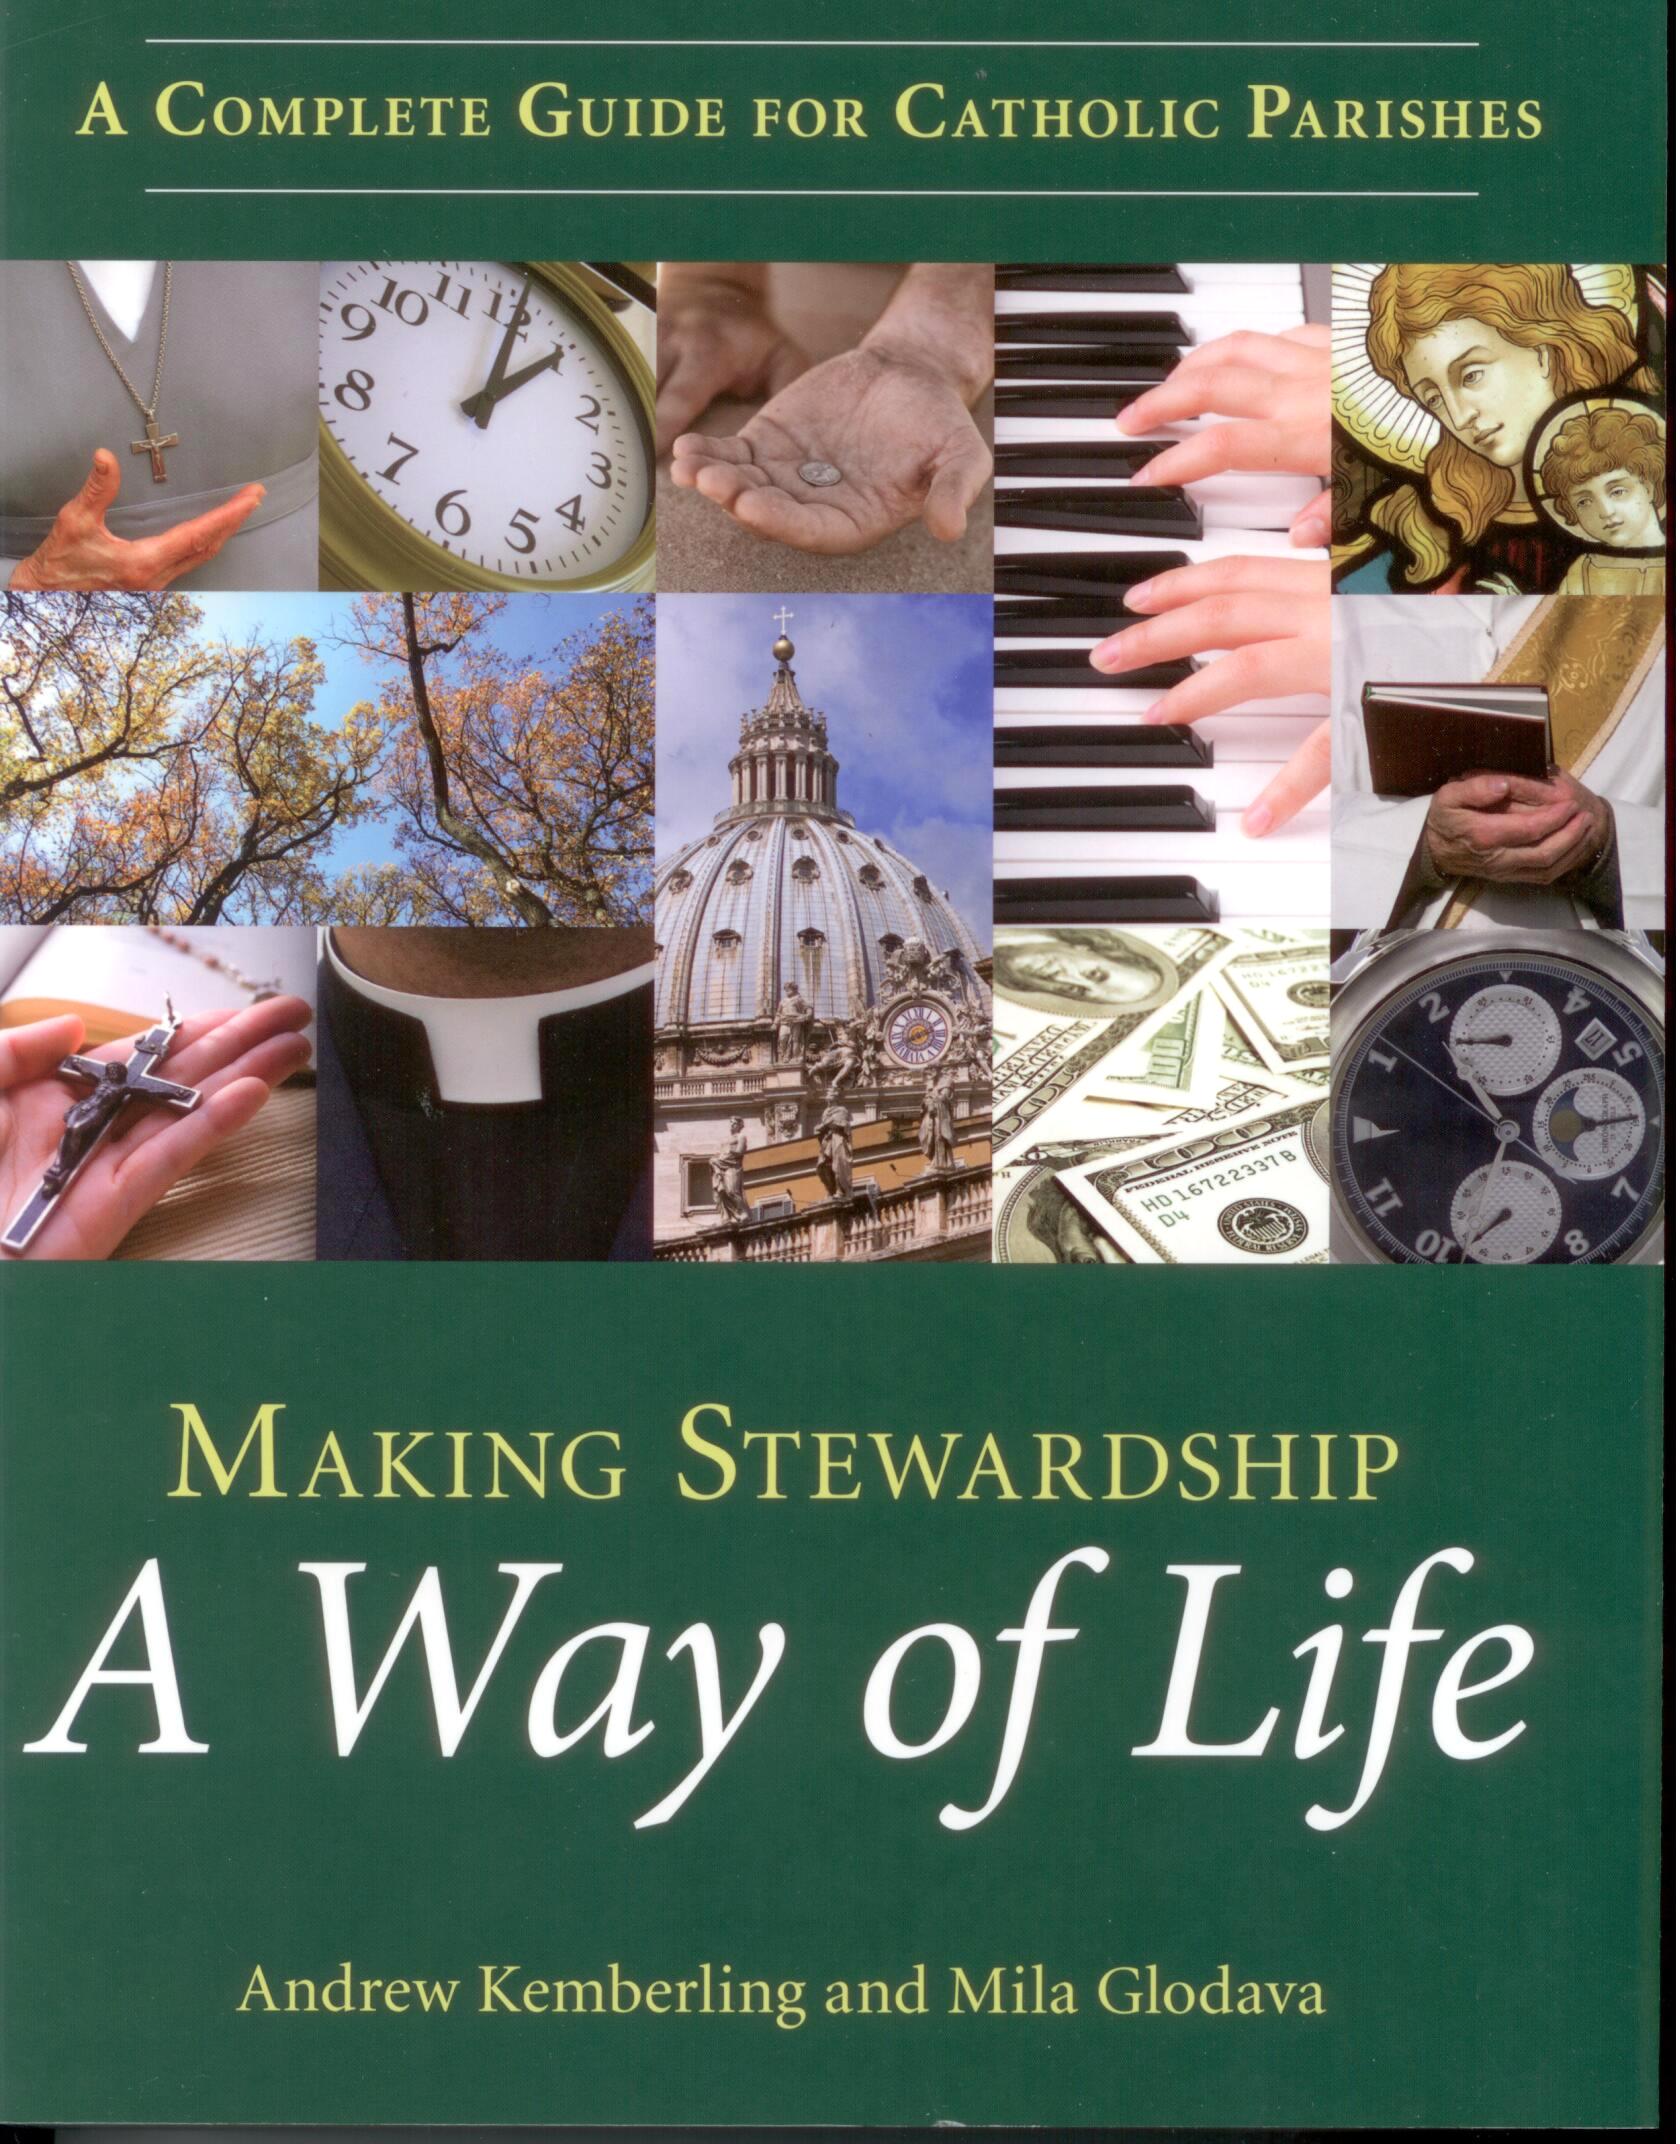 Making Stewardship a Way of Life by Andrew Kemberling108-9781592765775